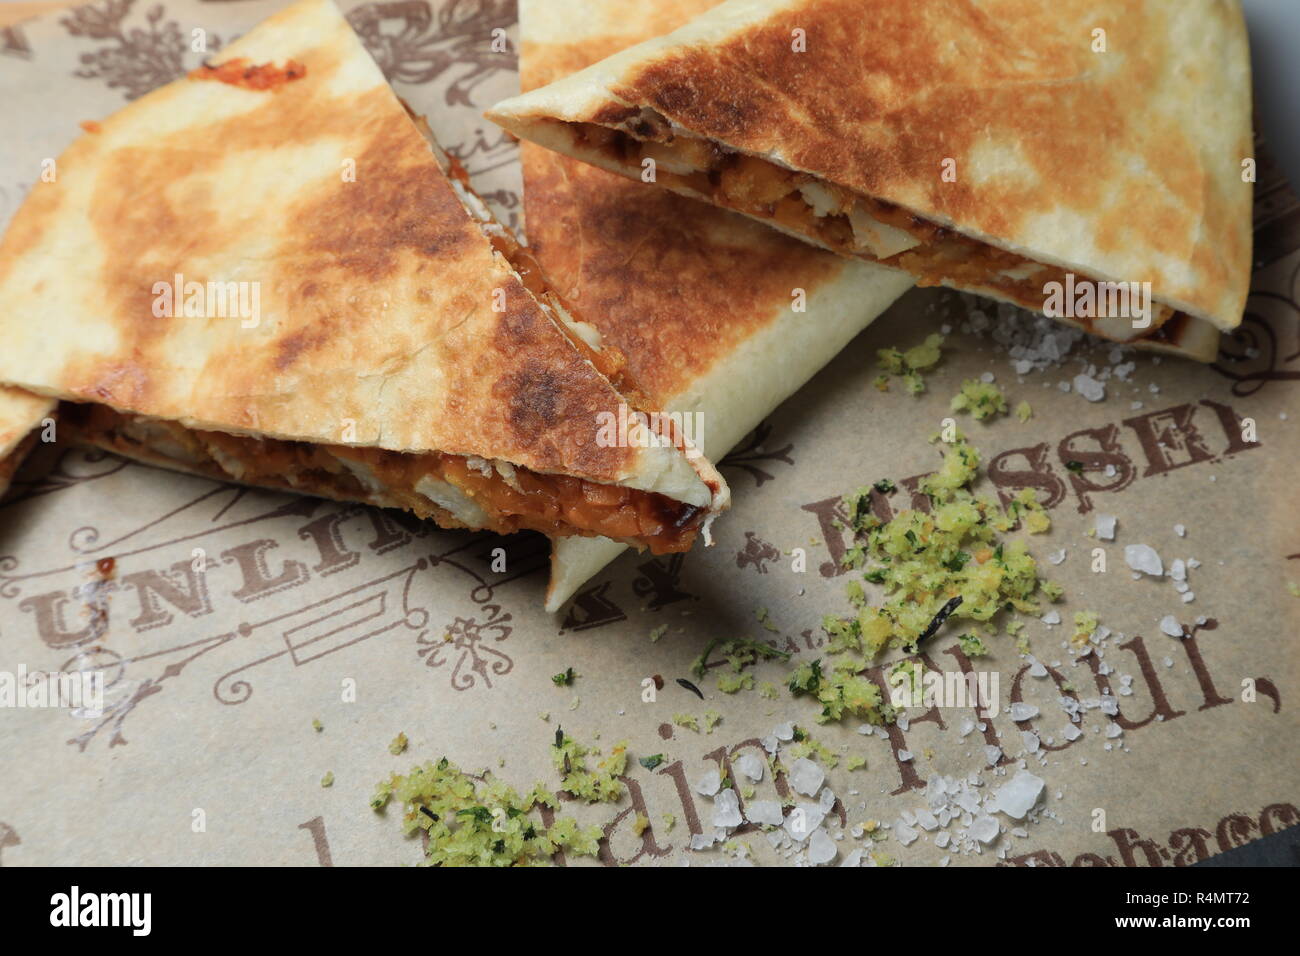 A shot of a tortilla sandwich cut in several pieces Stock Photo